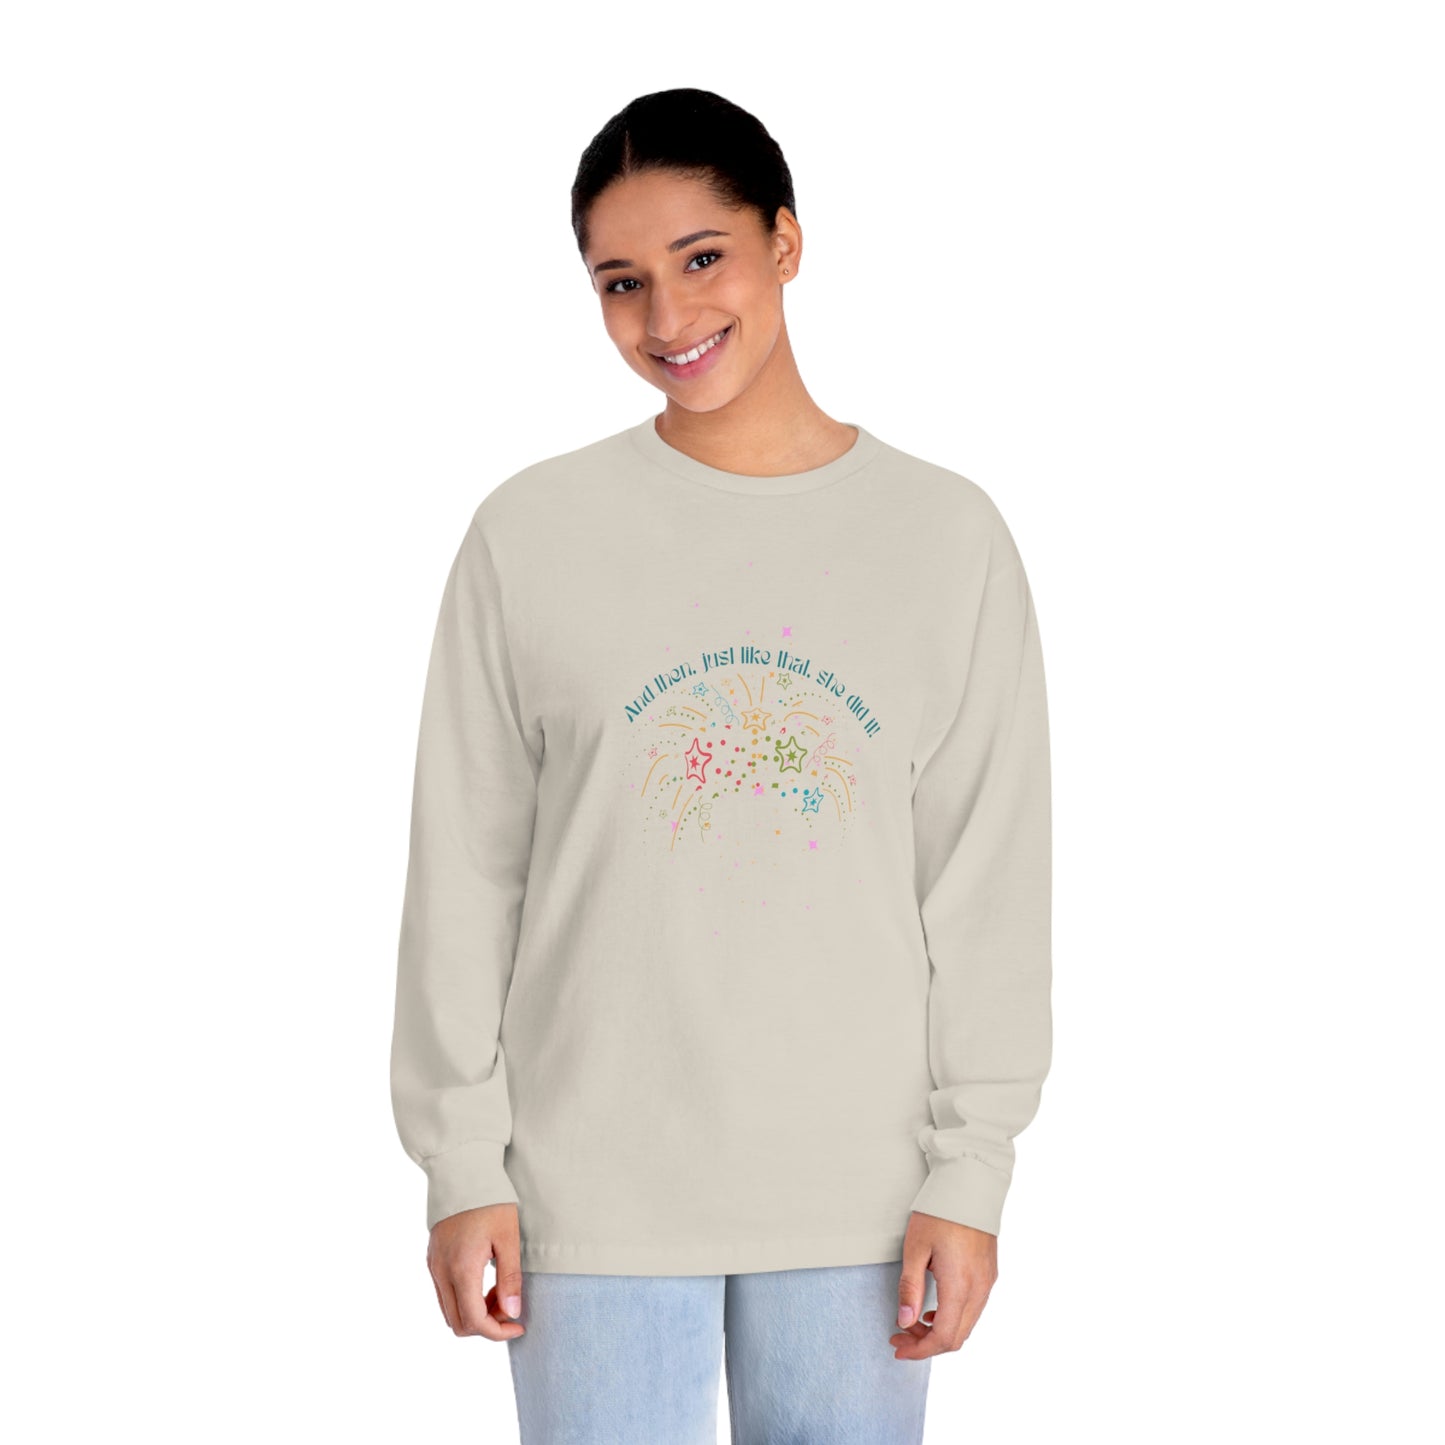 ‘And then, just like that, she did it! ‘  Printed Front & Back.  Unisex Classic Long Sleeve T-Shirt